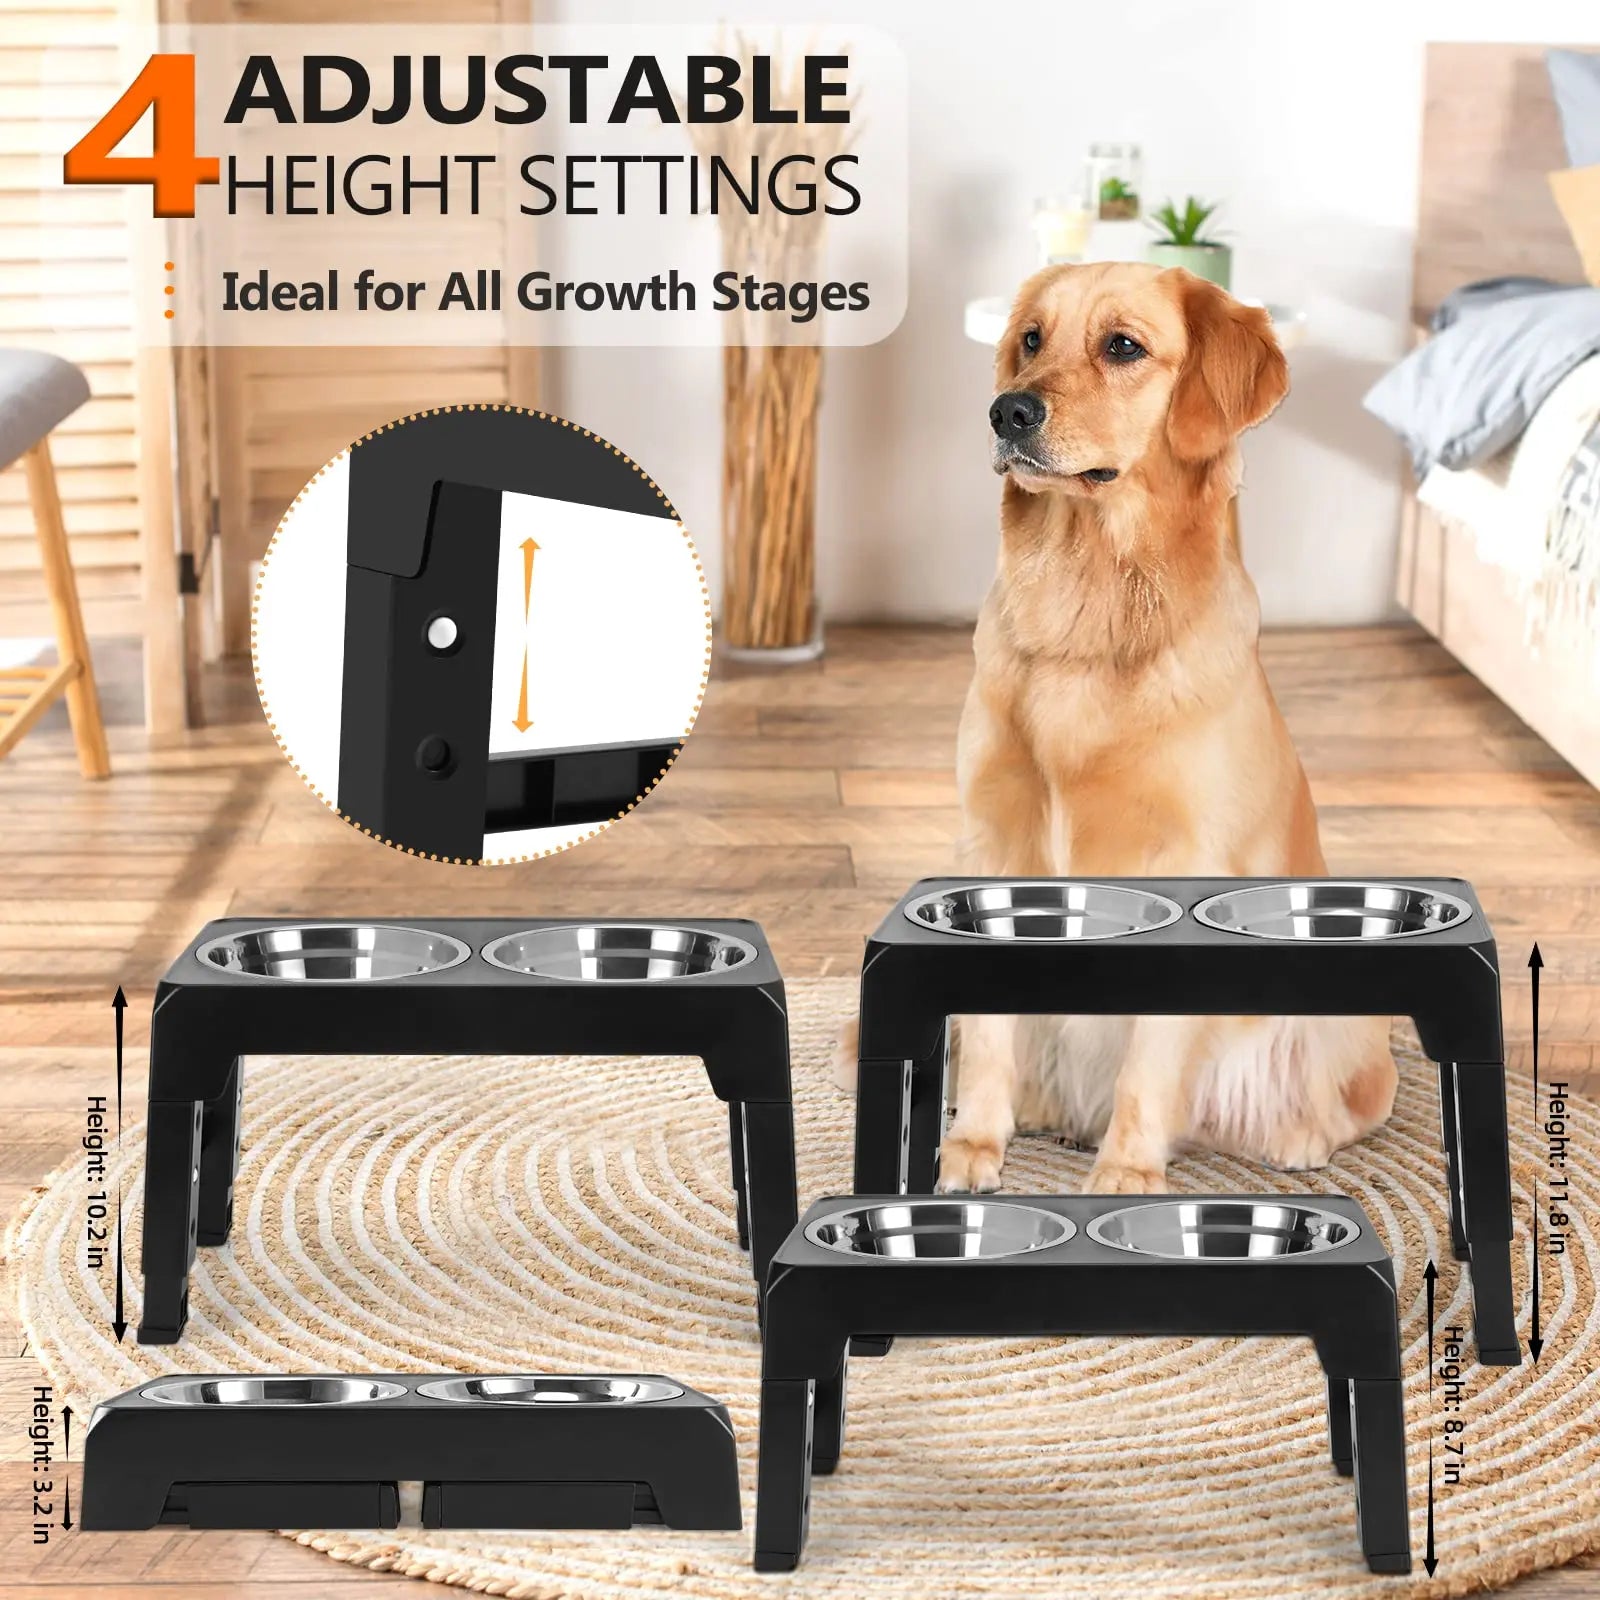 Adjustable Elevated Double Bowl Feeder